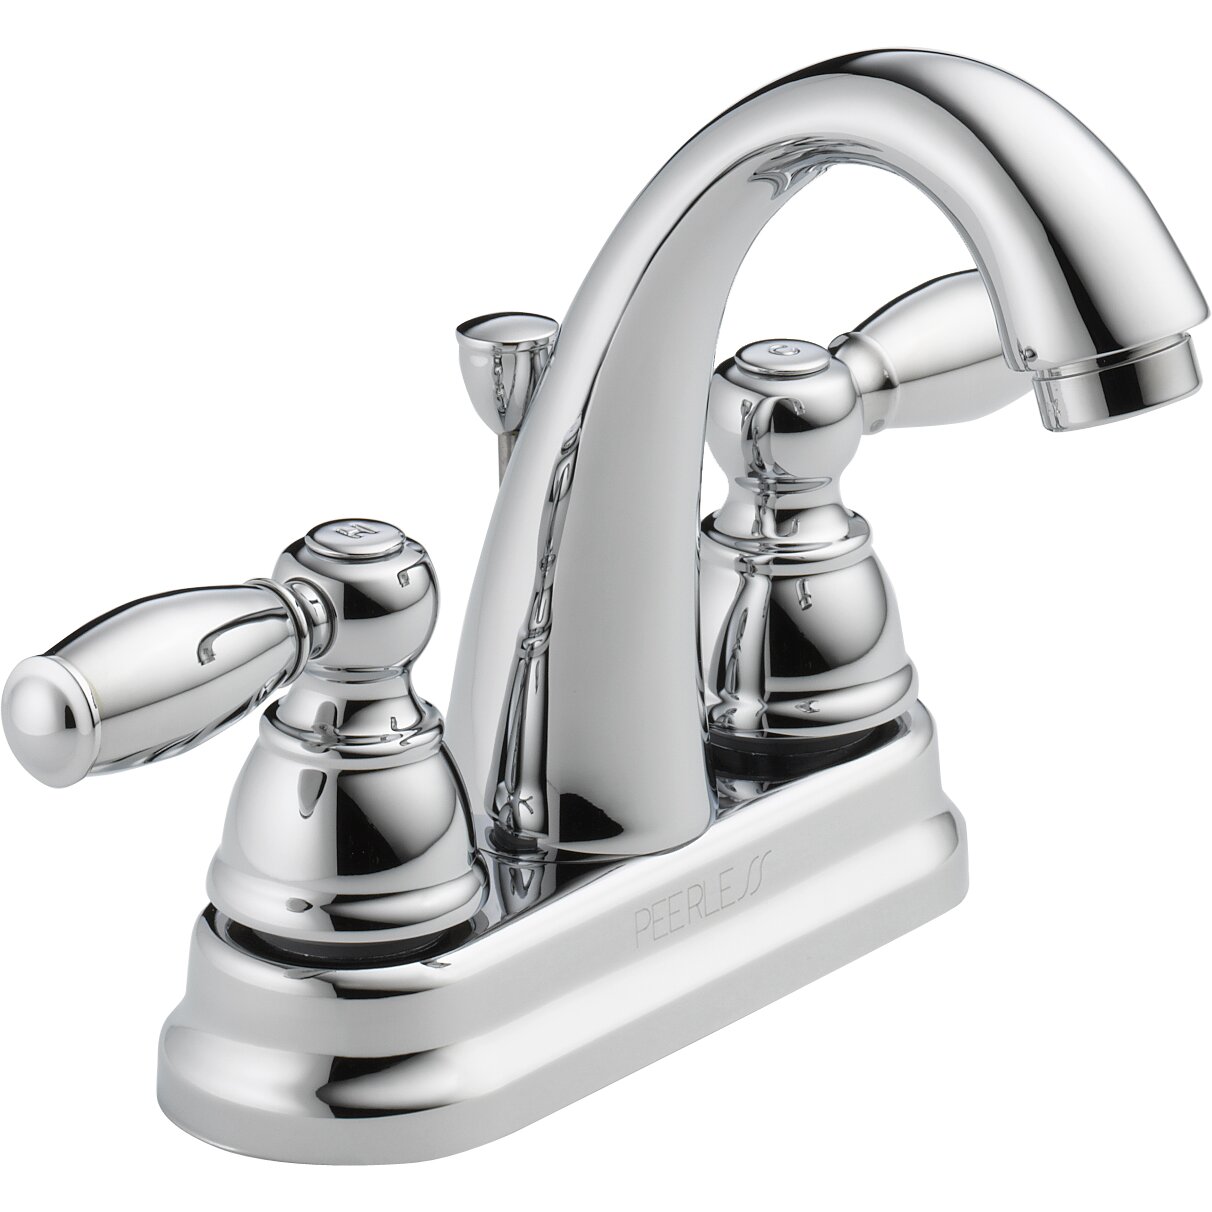 Peerless Kitchen Faucets Reviews Peerless Faucets Two Handle